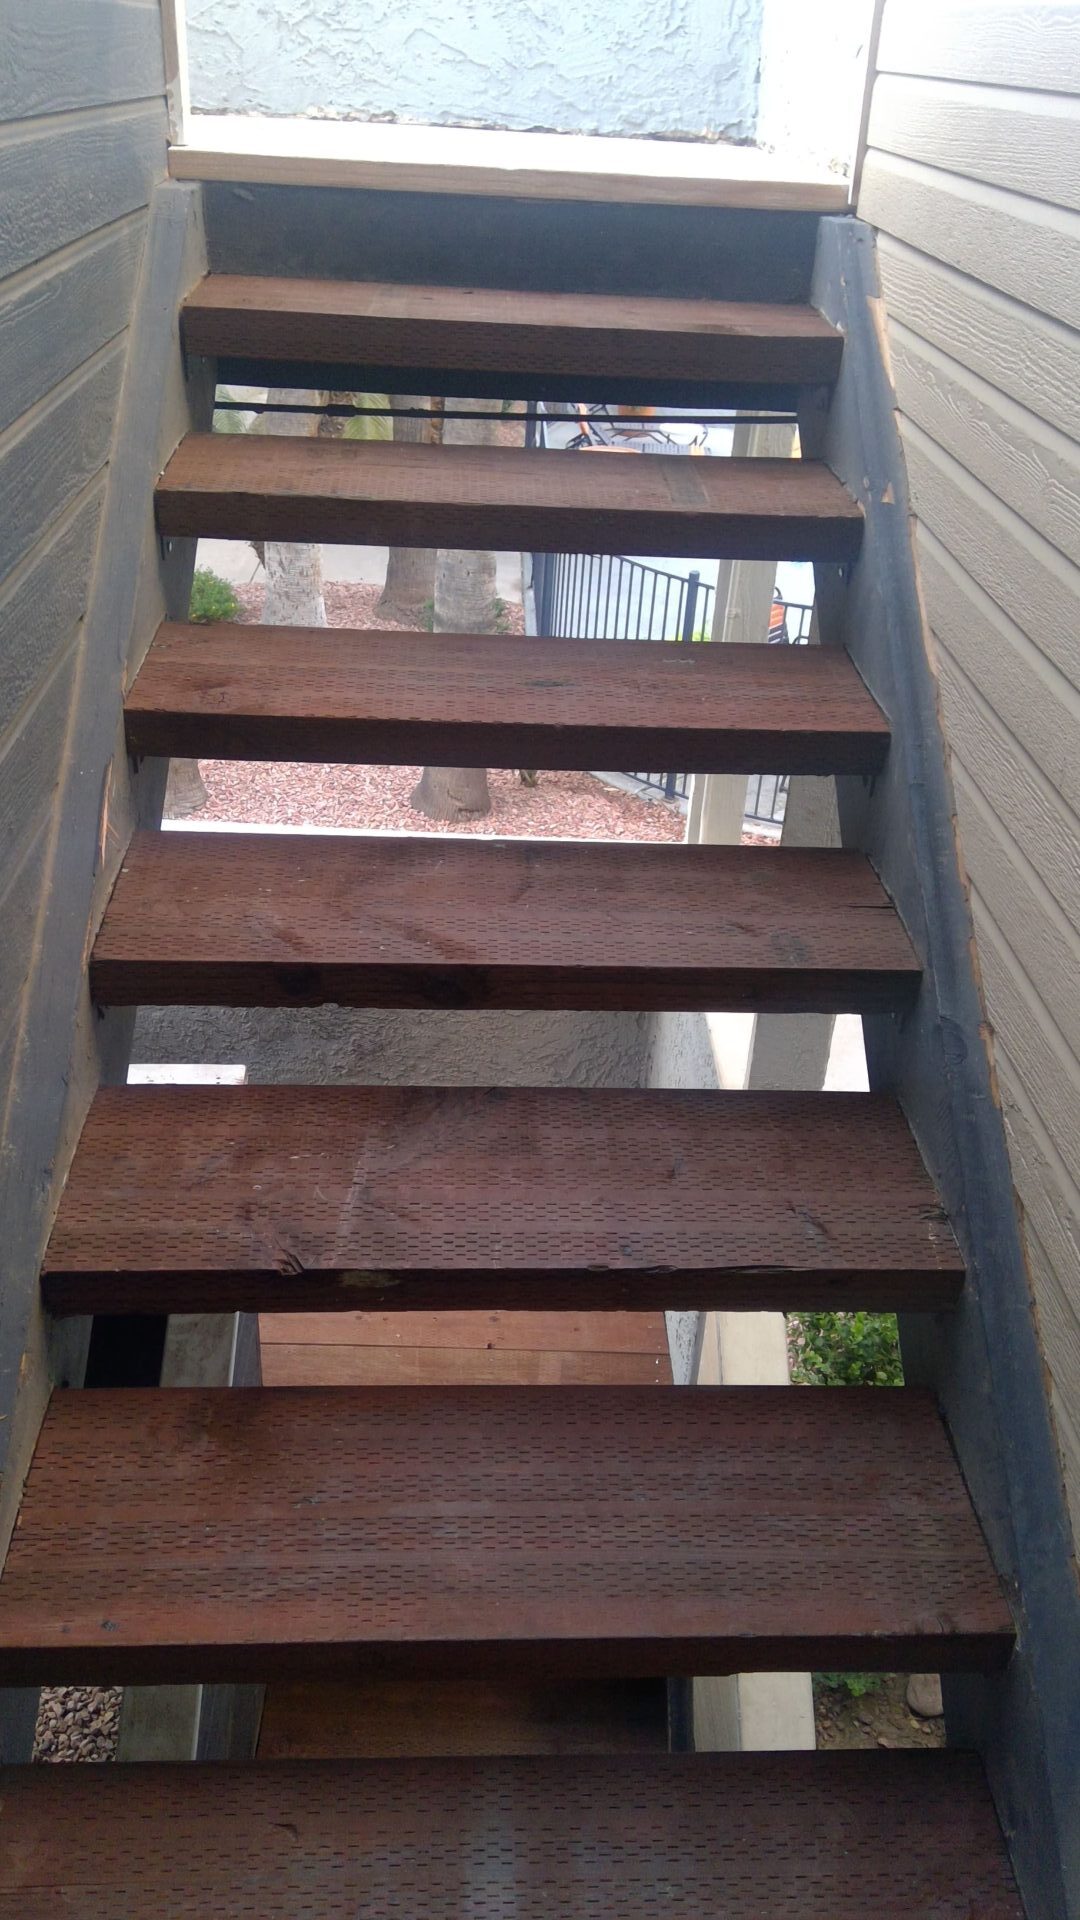 A wooden staircase with no railing and no handrail.